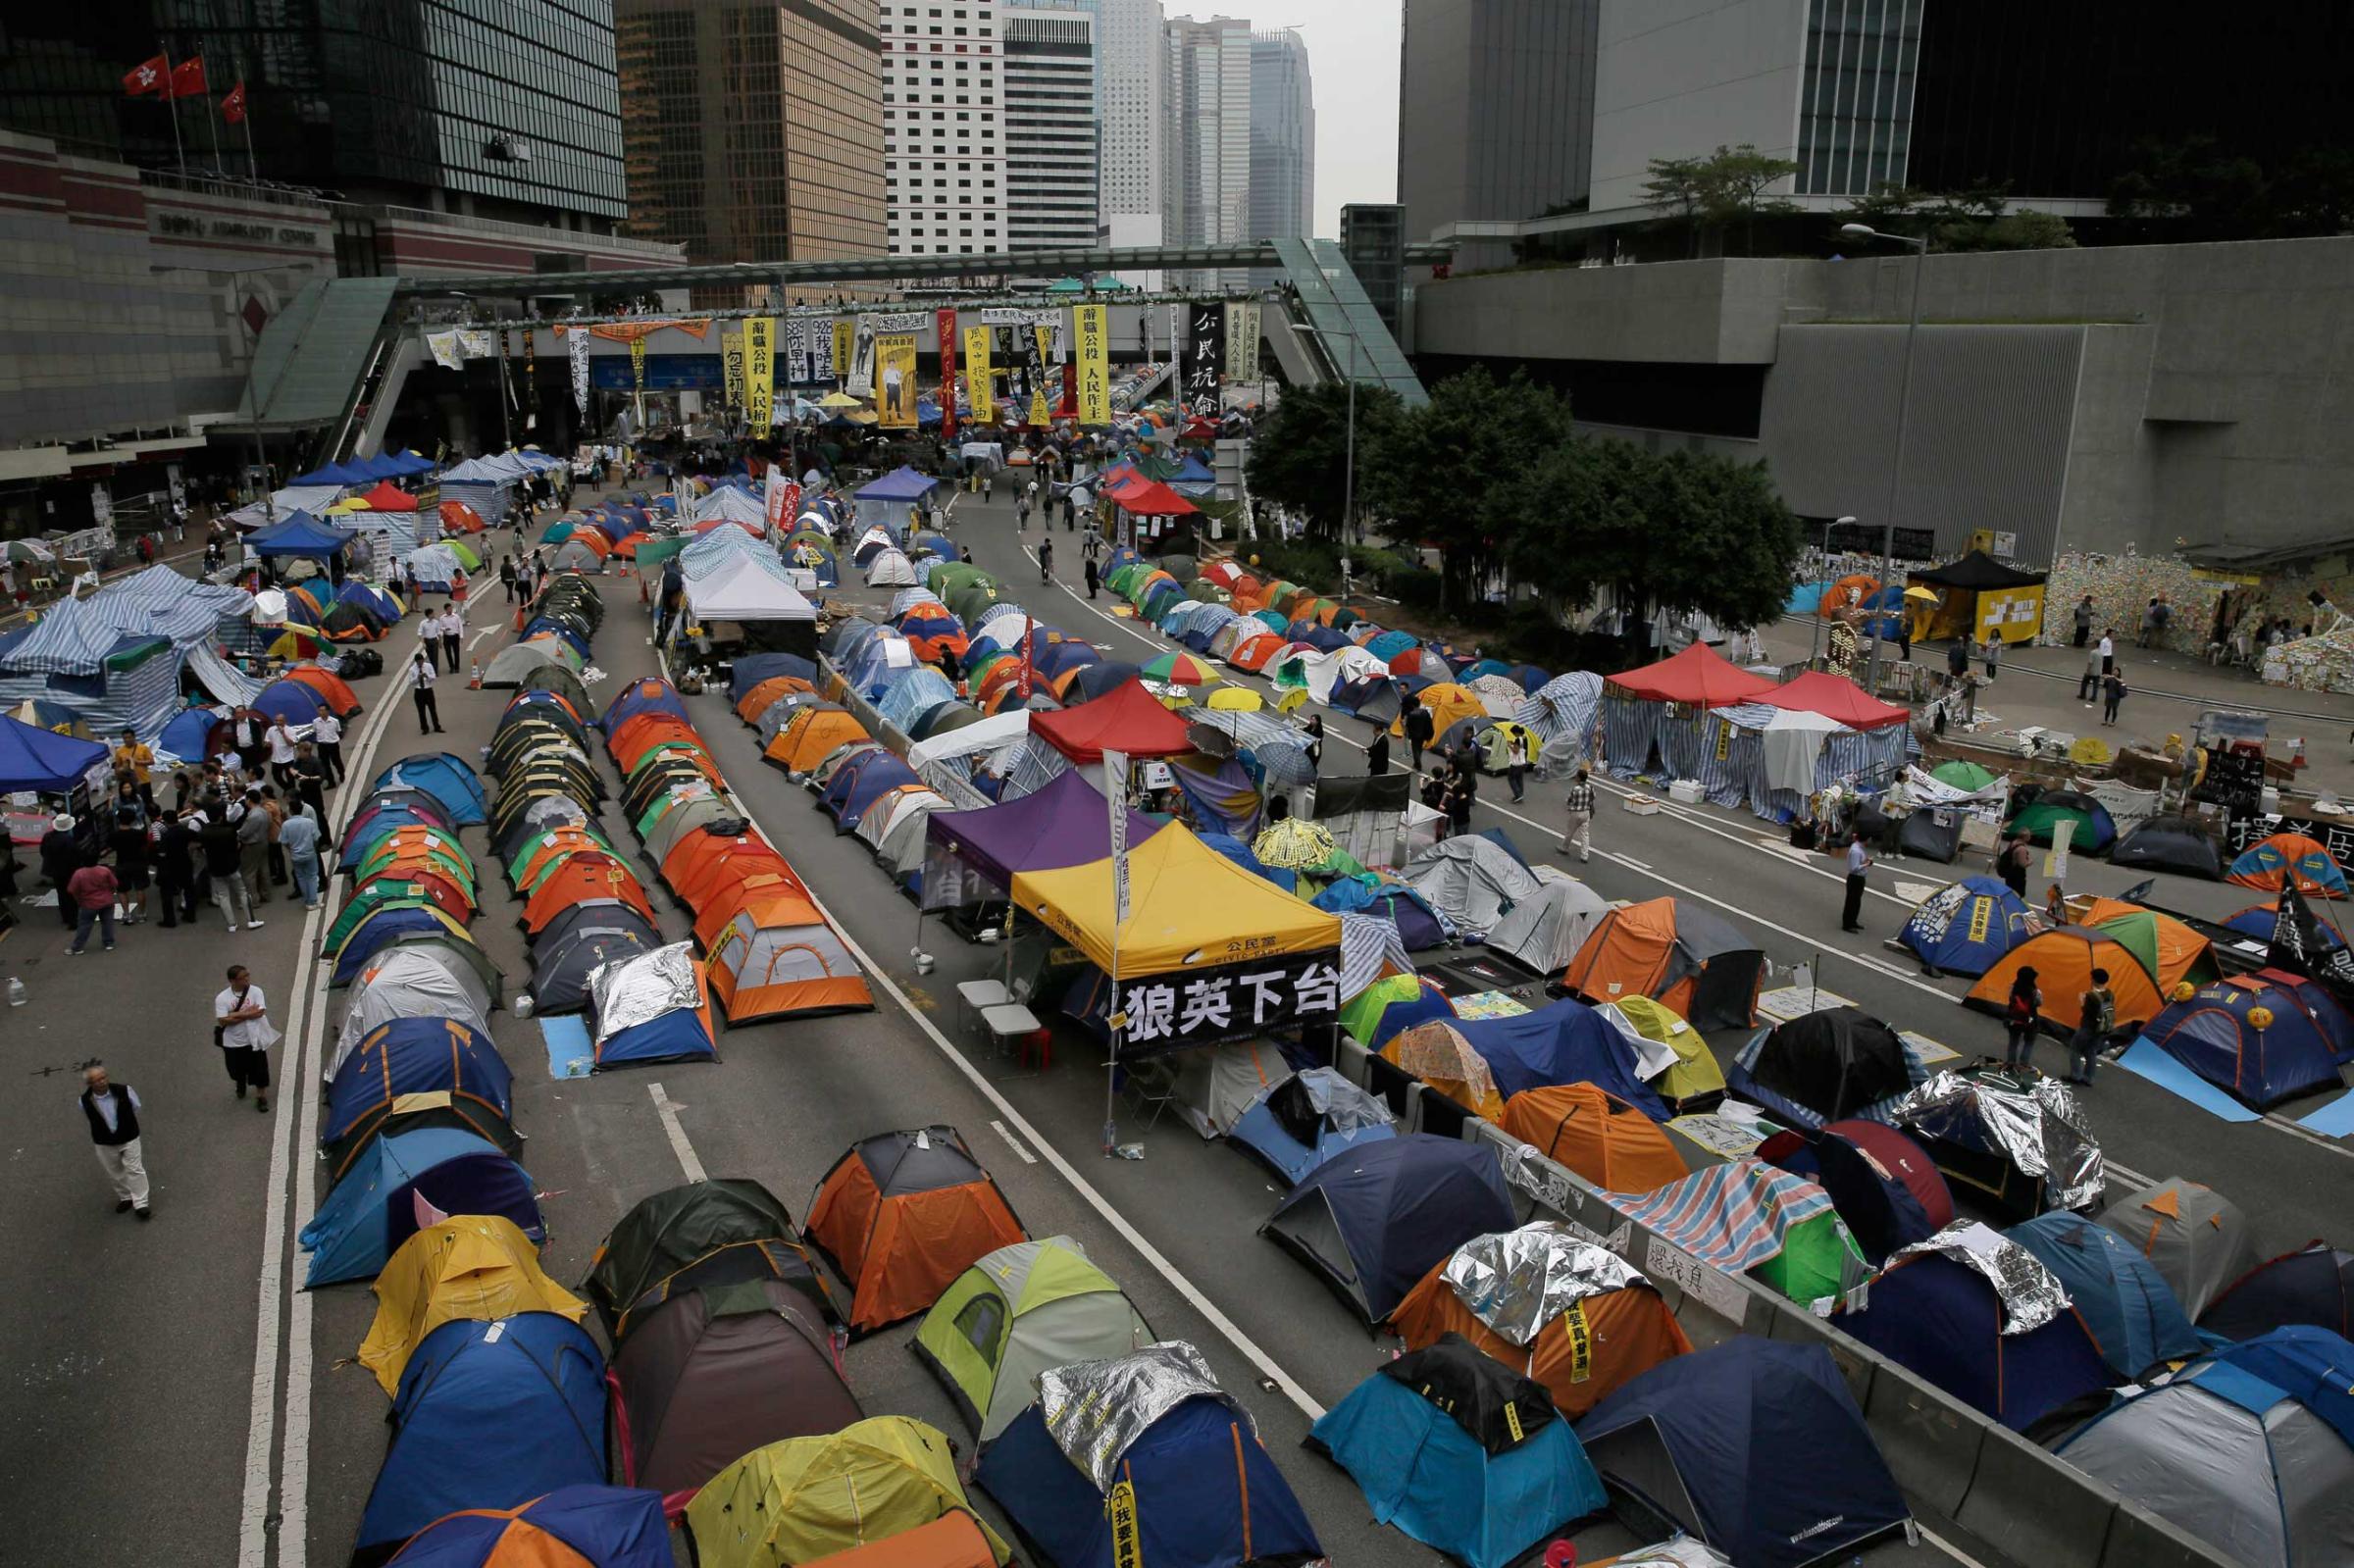 Tents set up by pro-democracy protesters are seen in an occupied area outside the government headquarters in Hong Kong's Admiralty district, Nov. 12, 2014.